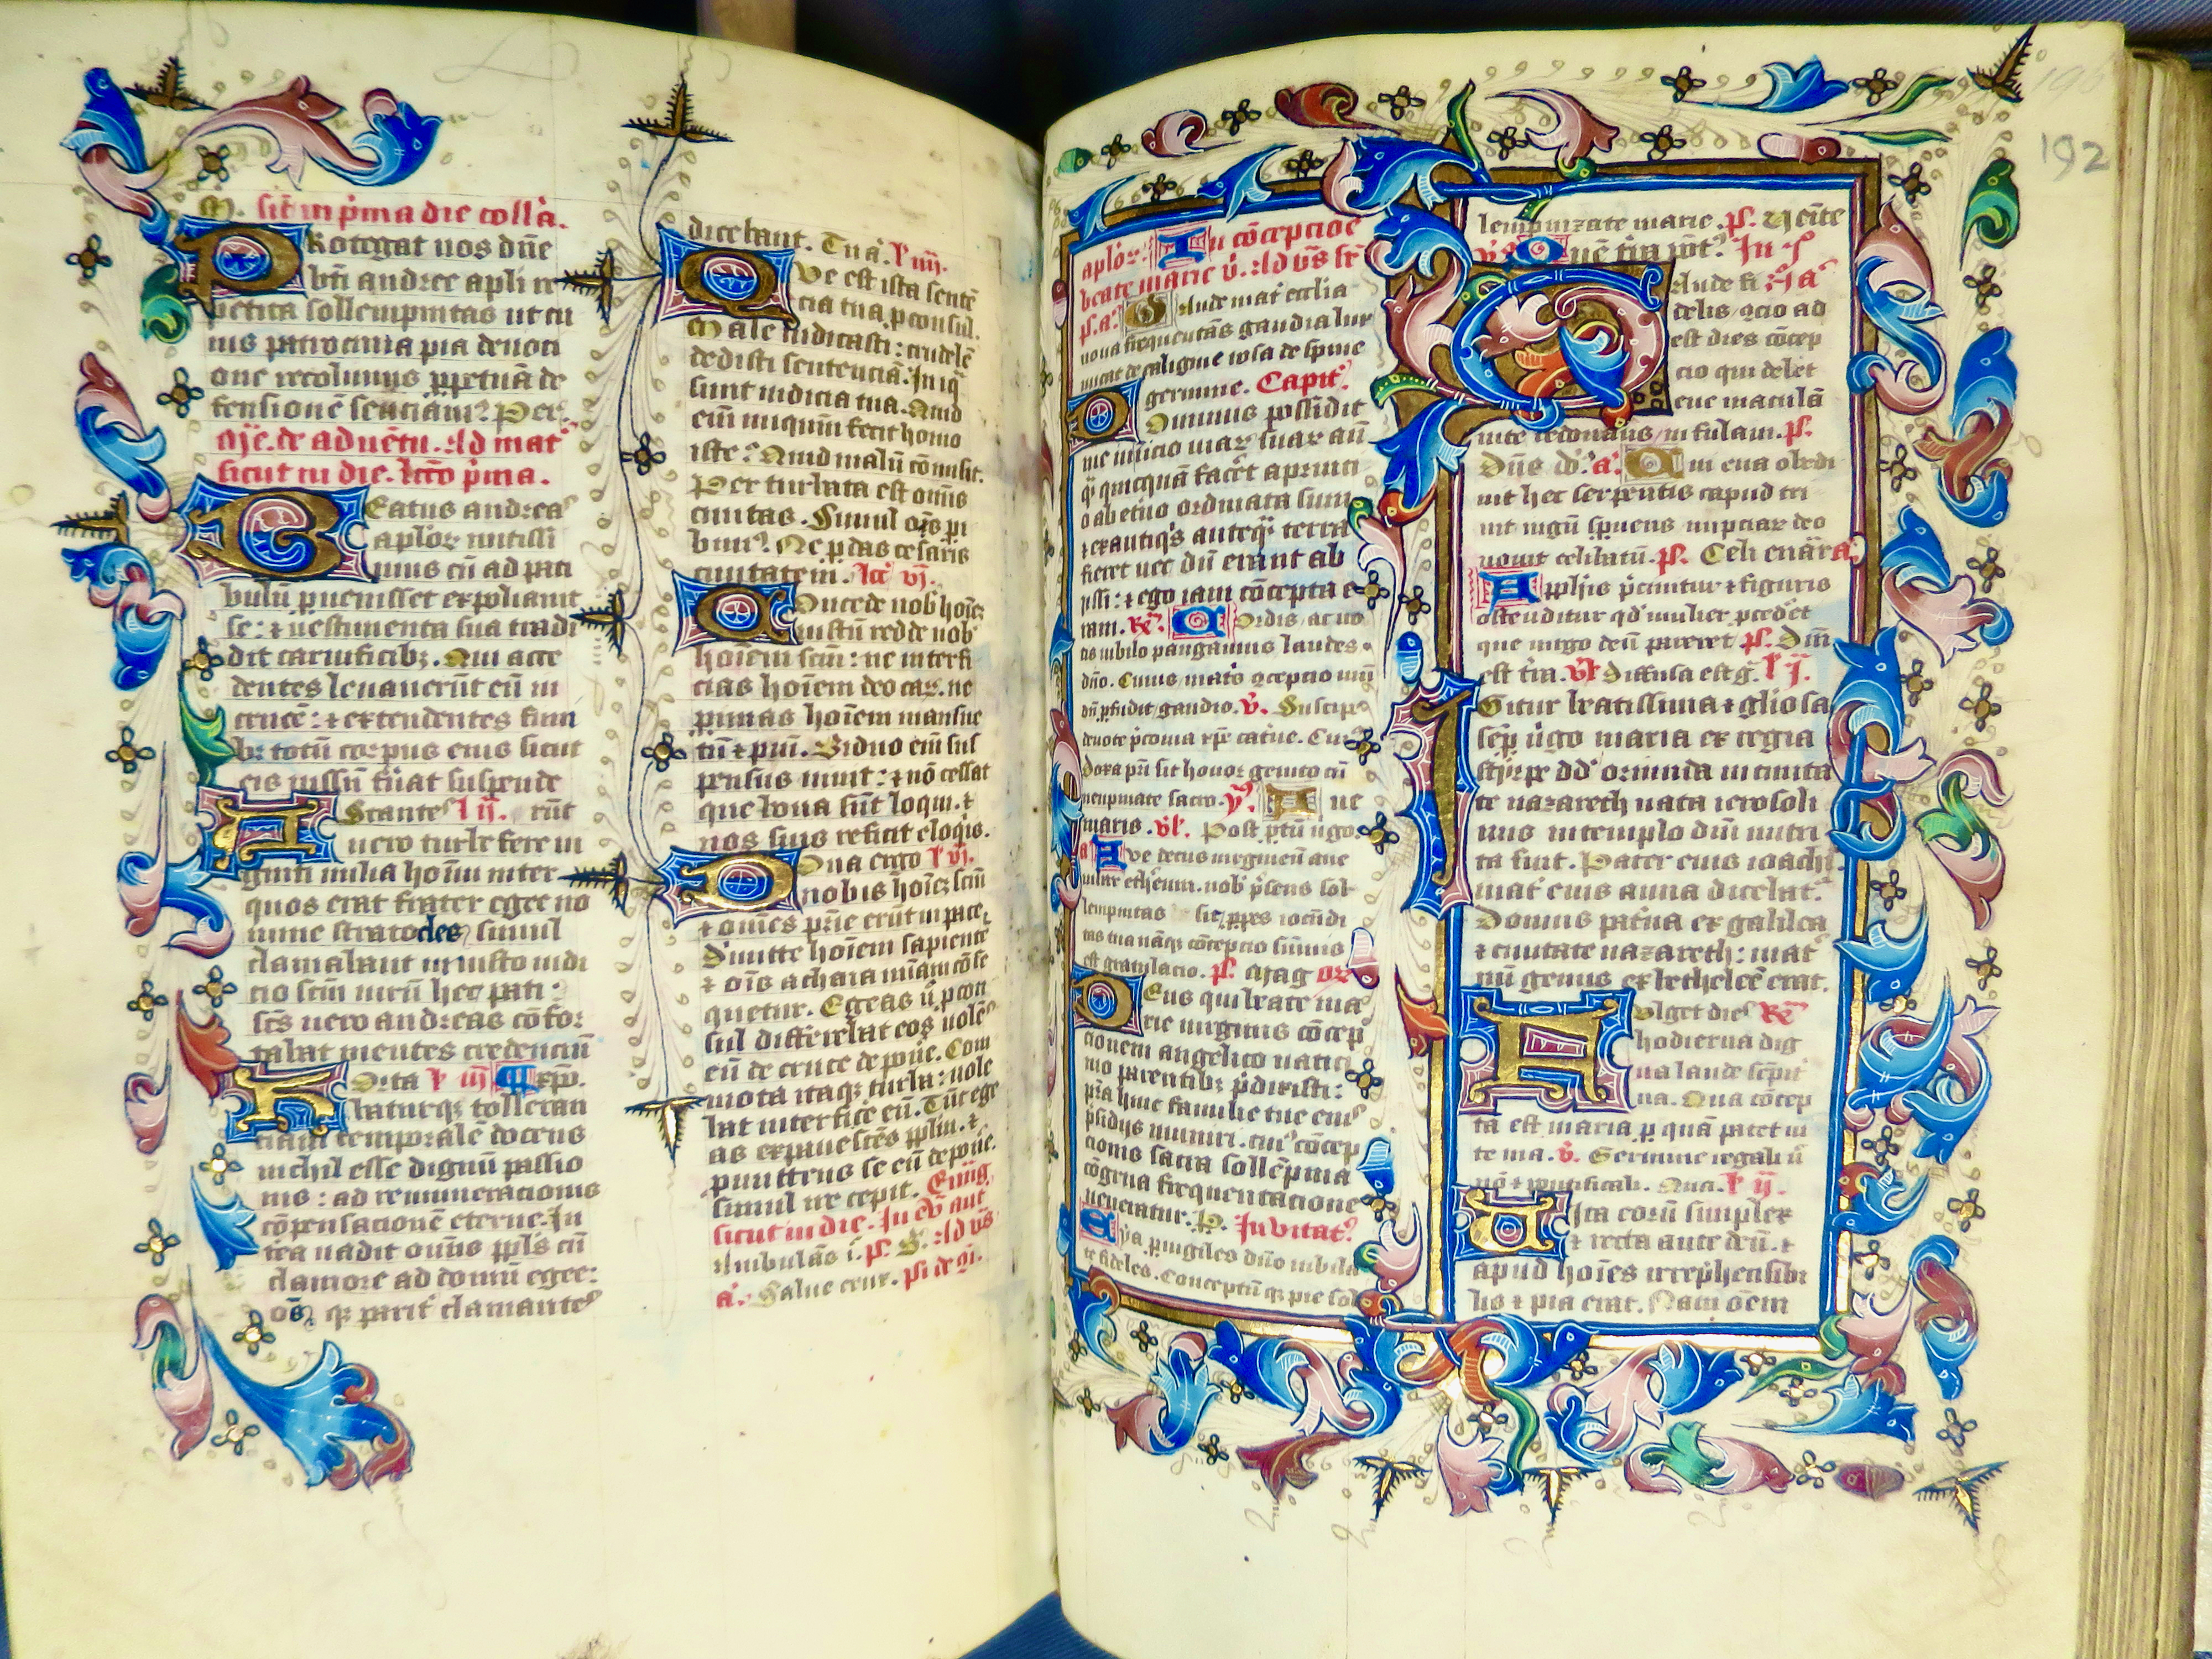 New Walsingham hymns from fifteenth century discovered